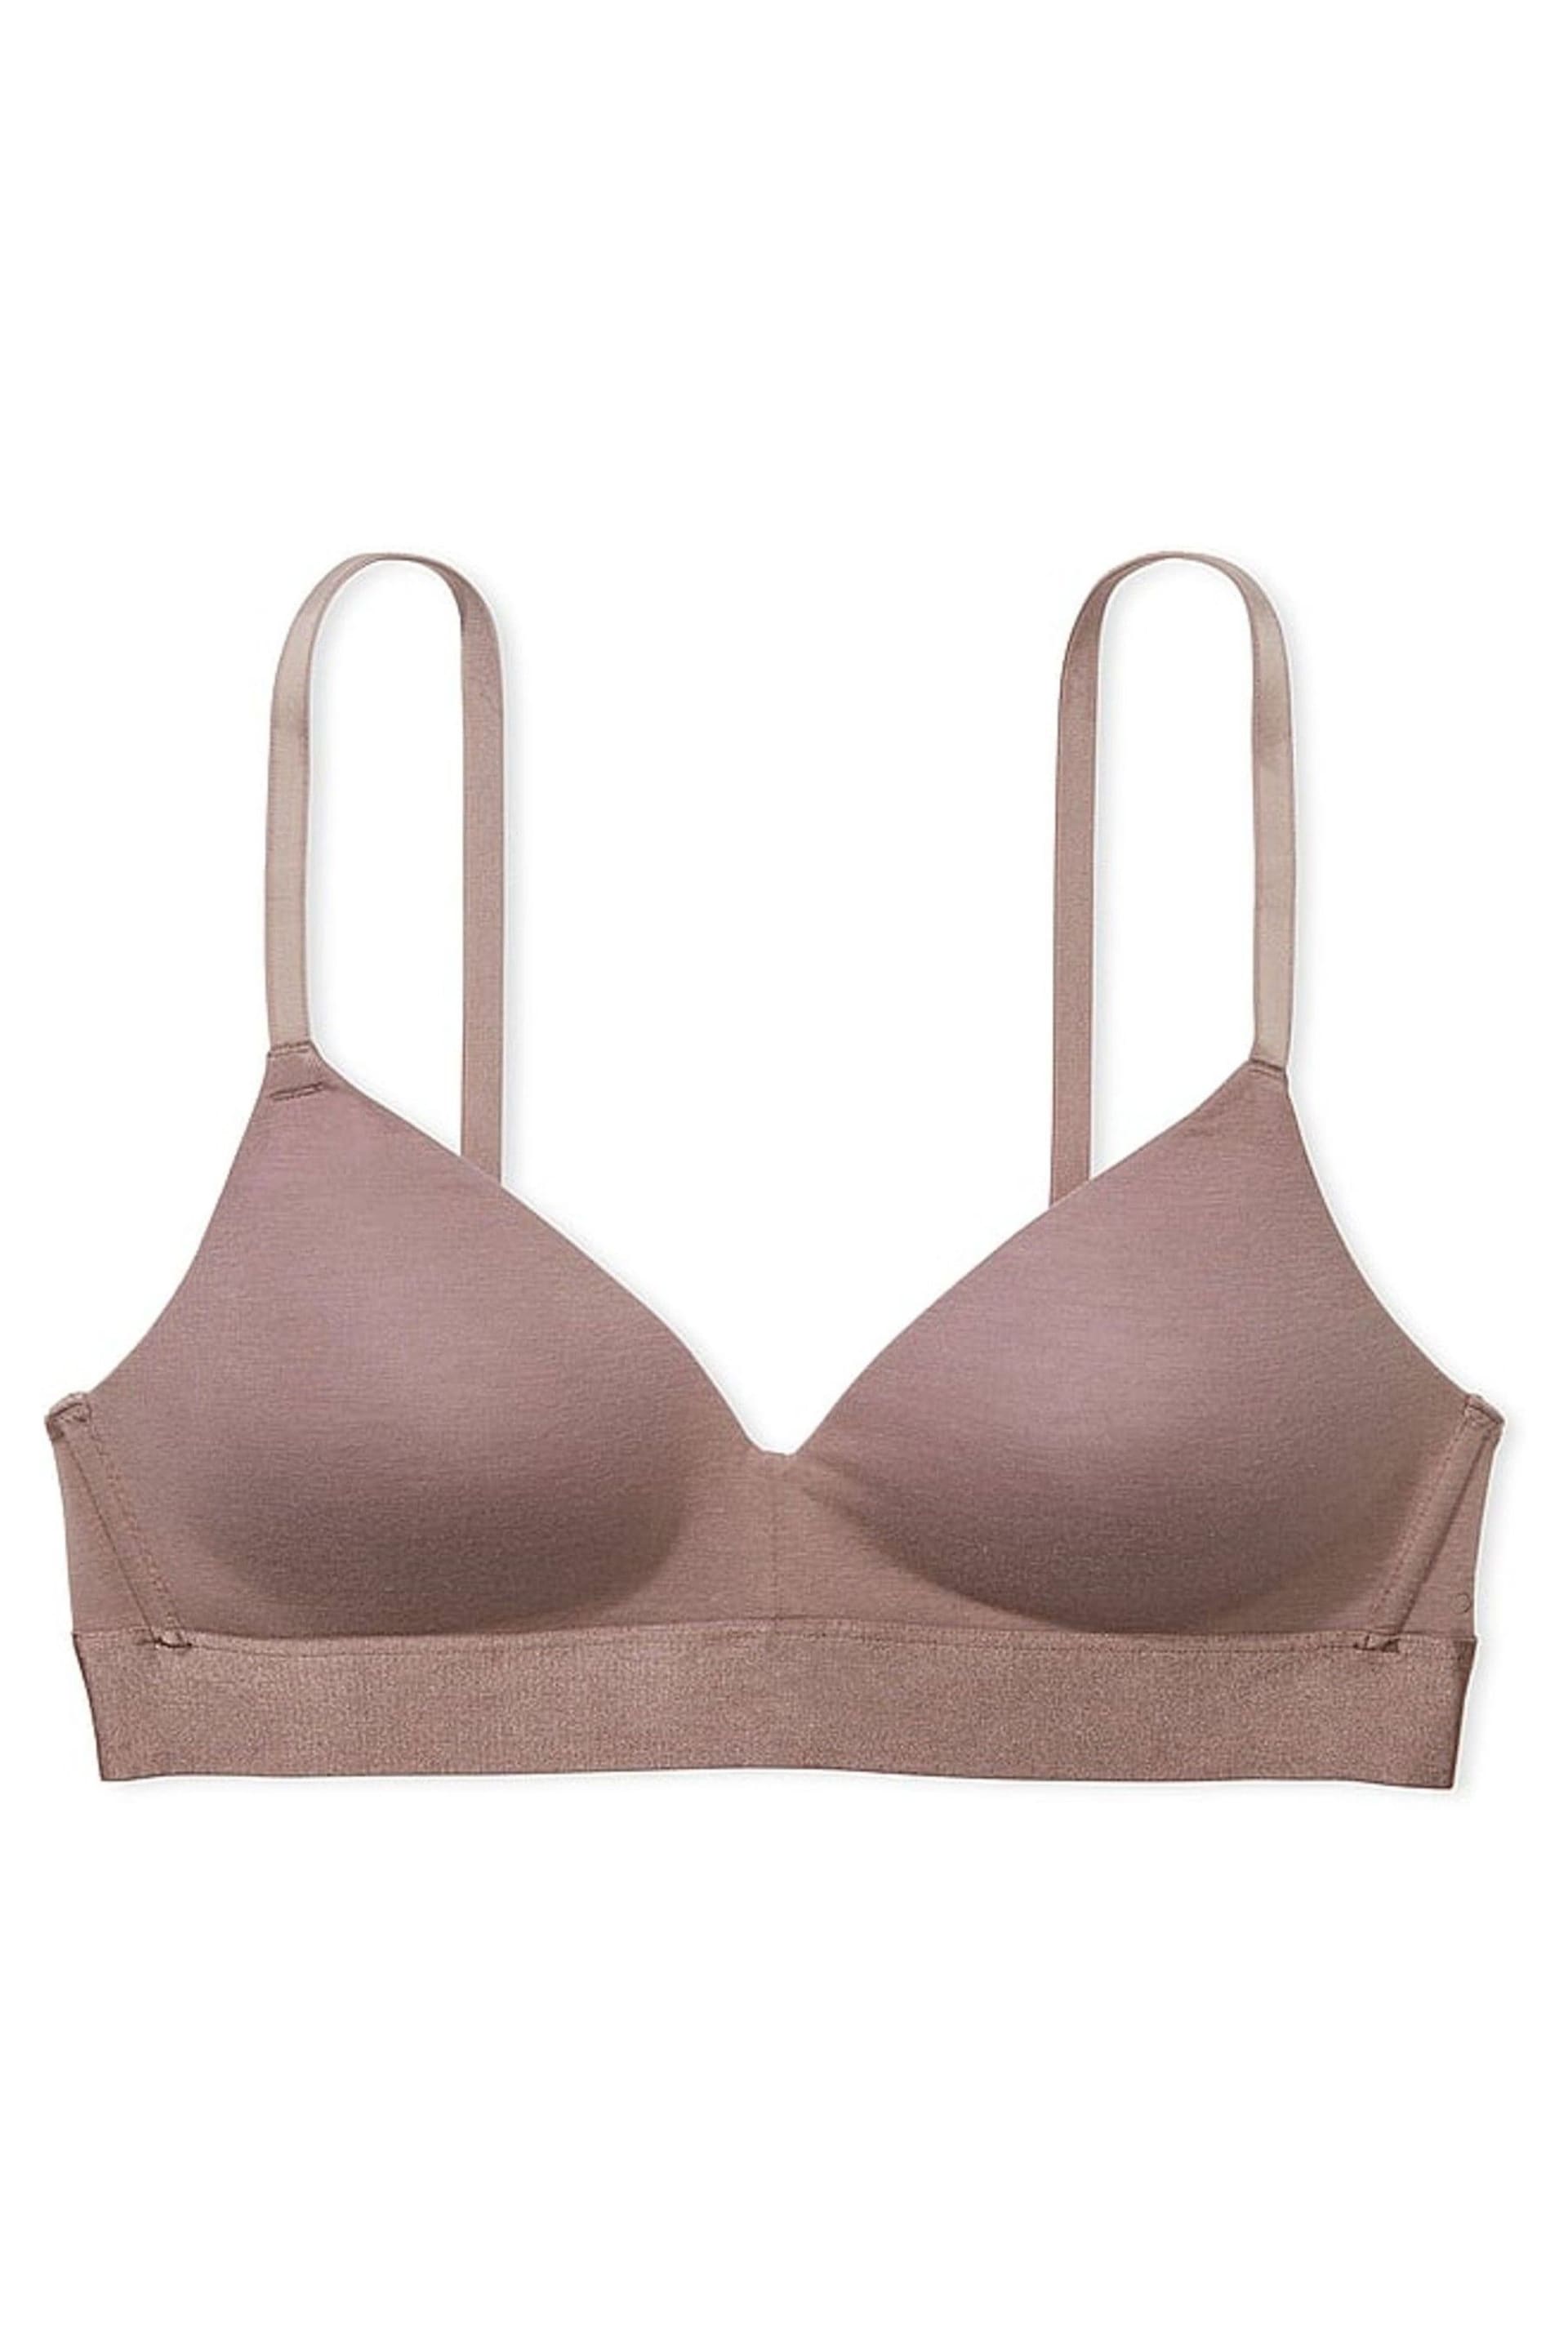 Victoria's Secret PINK Iced Coffee Brown Non Wired Lightly Lined Cotton Bra - Image 3 of 3